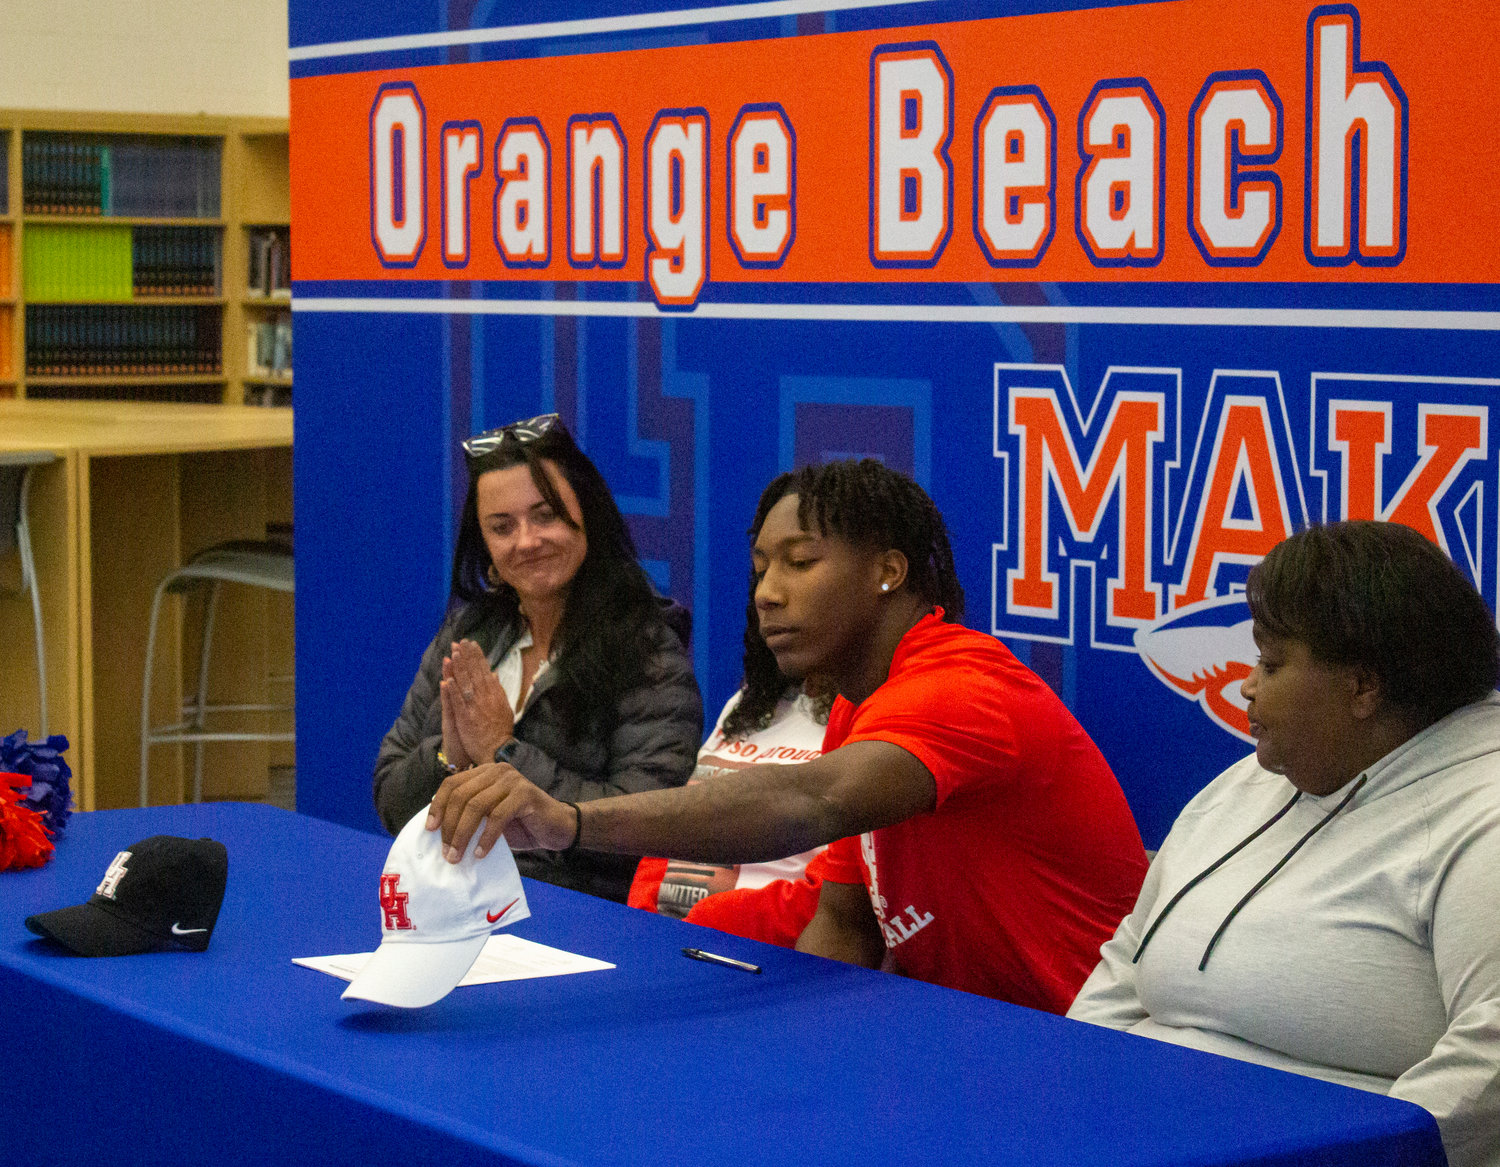 Chris Pearson picks up the University of Houston hat after he shared his appreciation to those in attendance of the National Signing Day ceremony Wednesday, Dec. 21, at Orange Beach High School.